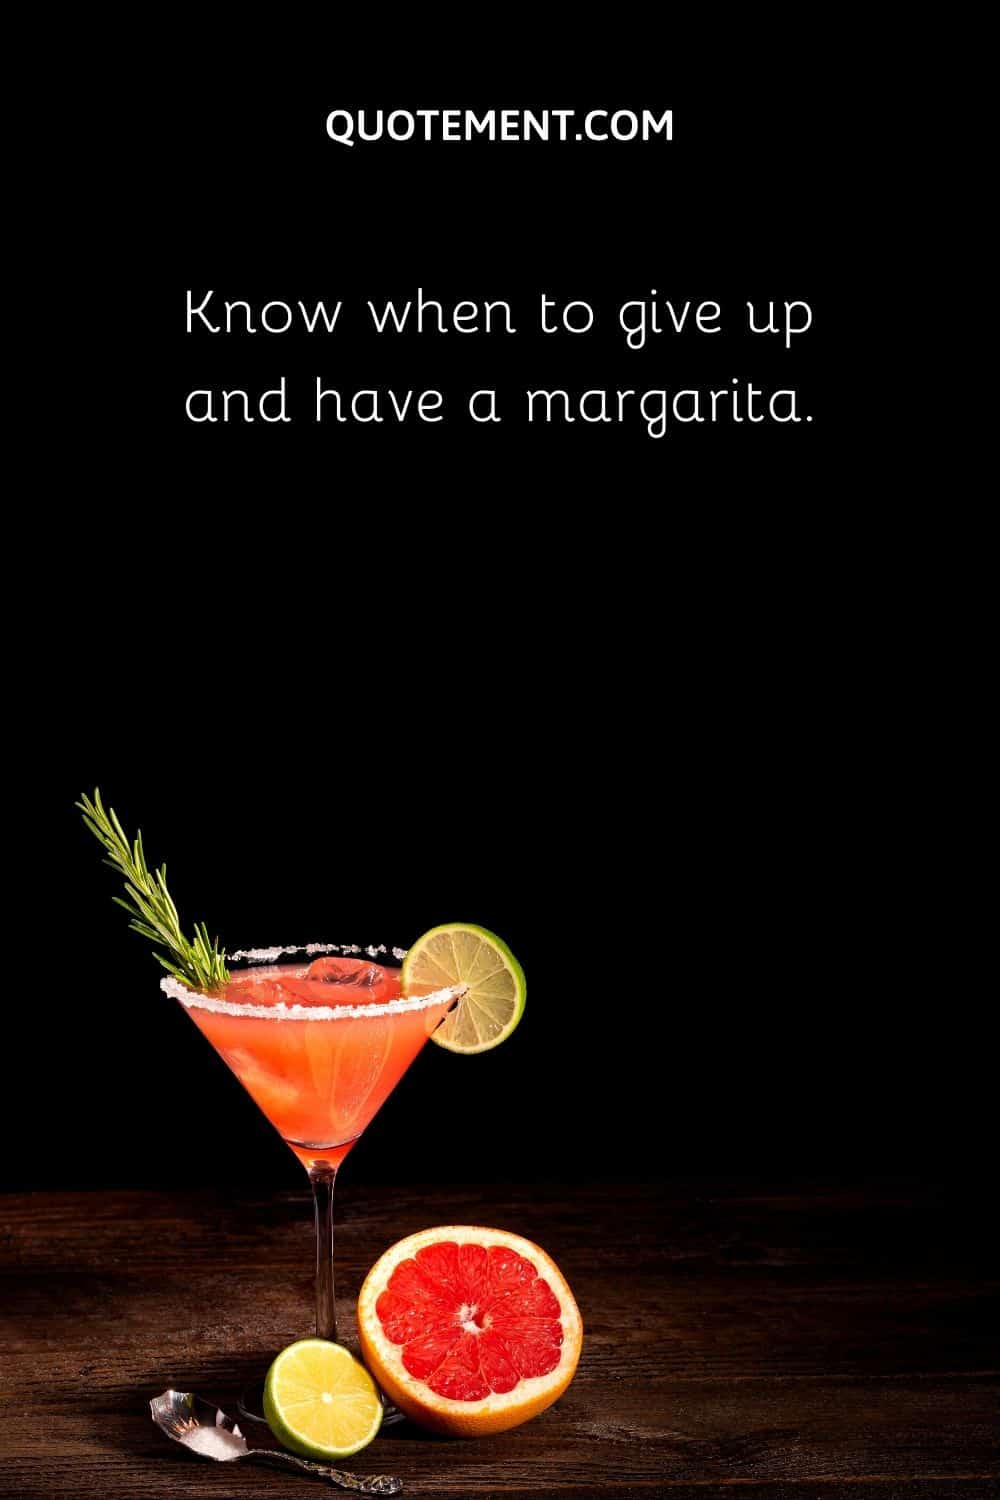 Know when to give up and have a margarita.